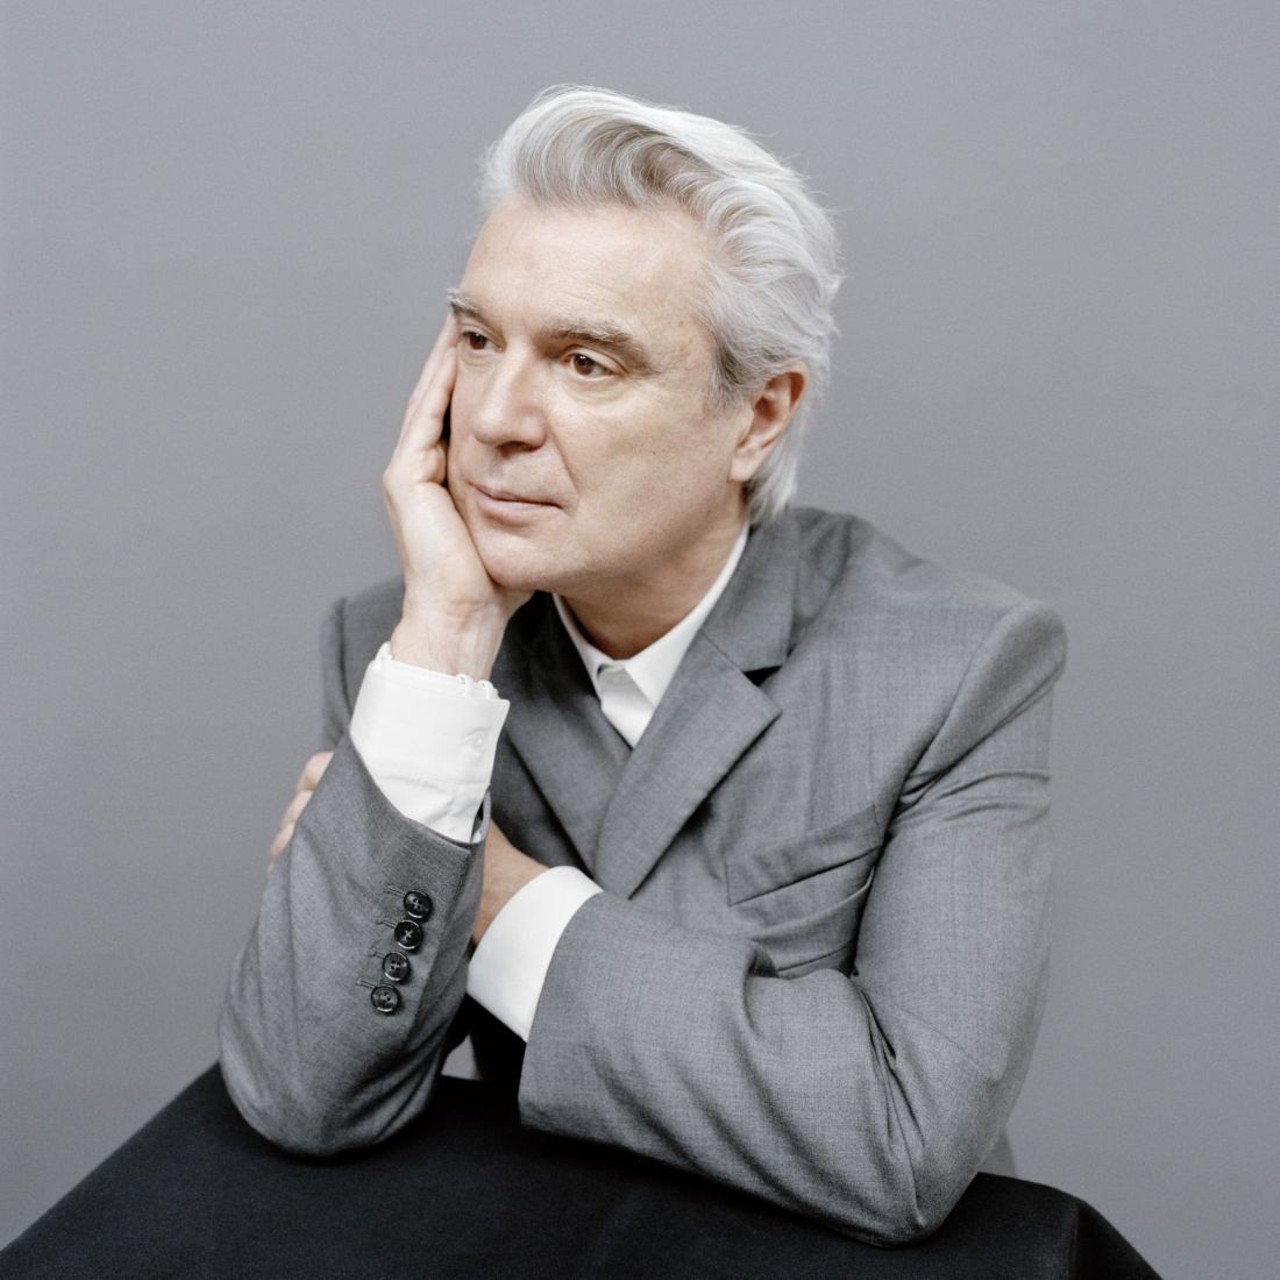 David Byrne
Fox Theatre, August 10, 8 p.m., $37.50+
At 65, David Byrne is still pushing the limits of creativity and making great music. The former Talking Heads frontman has had a very healthy solo career in recent years and released a great new song, &#147;Everyone&#146;s Coming To My House&#148; in January. Expect a great stage show during his American Utopia Tour from the same man who brought us the incredible concert film Stop Making Sense all those years ago.
Photo by Jody Rogac